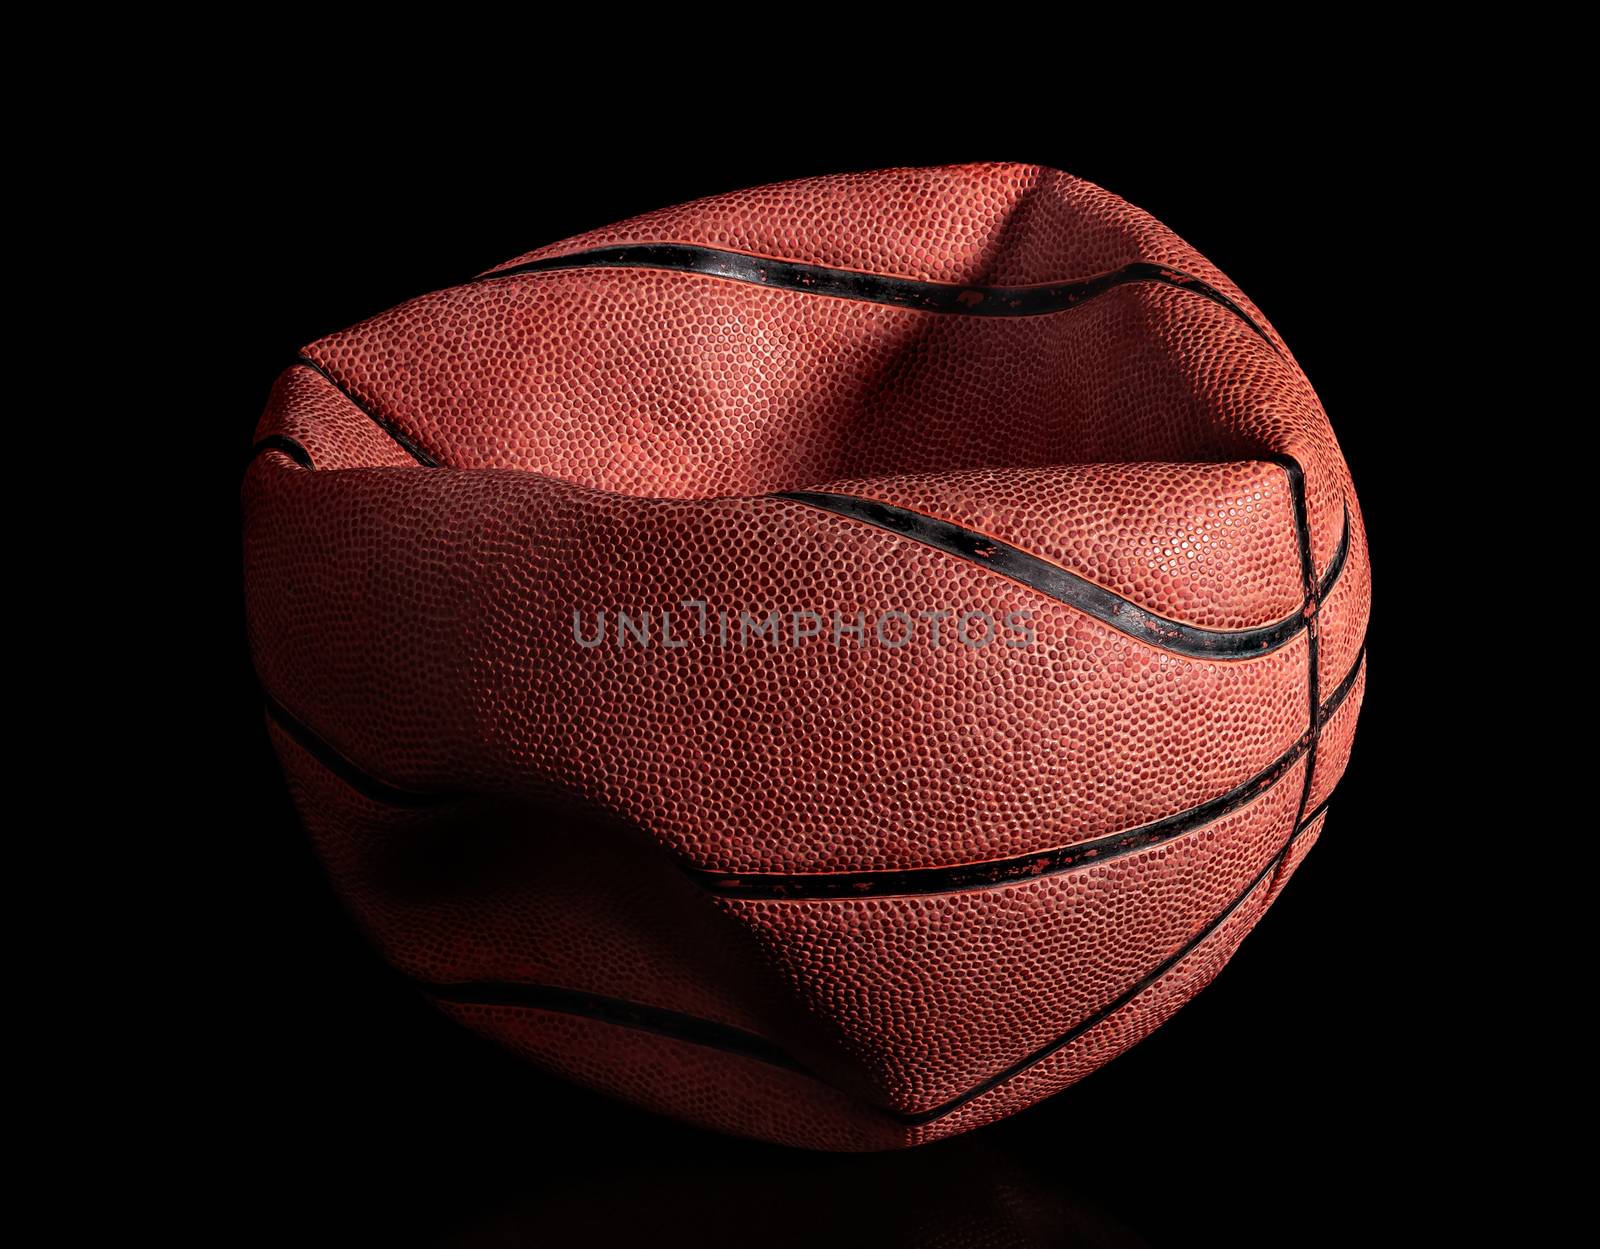 Deflated old basketball by Cipariss